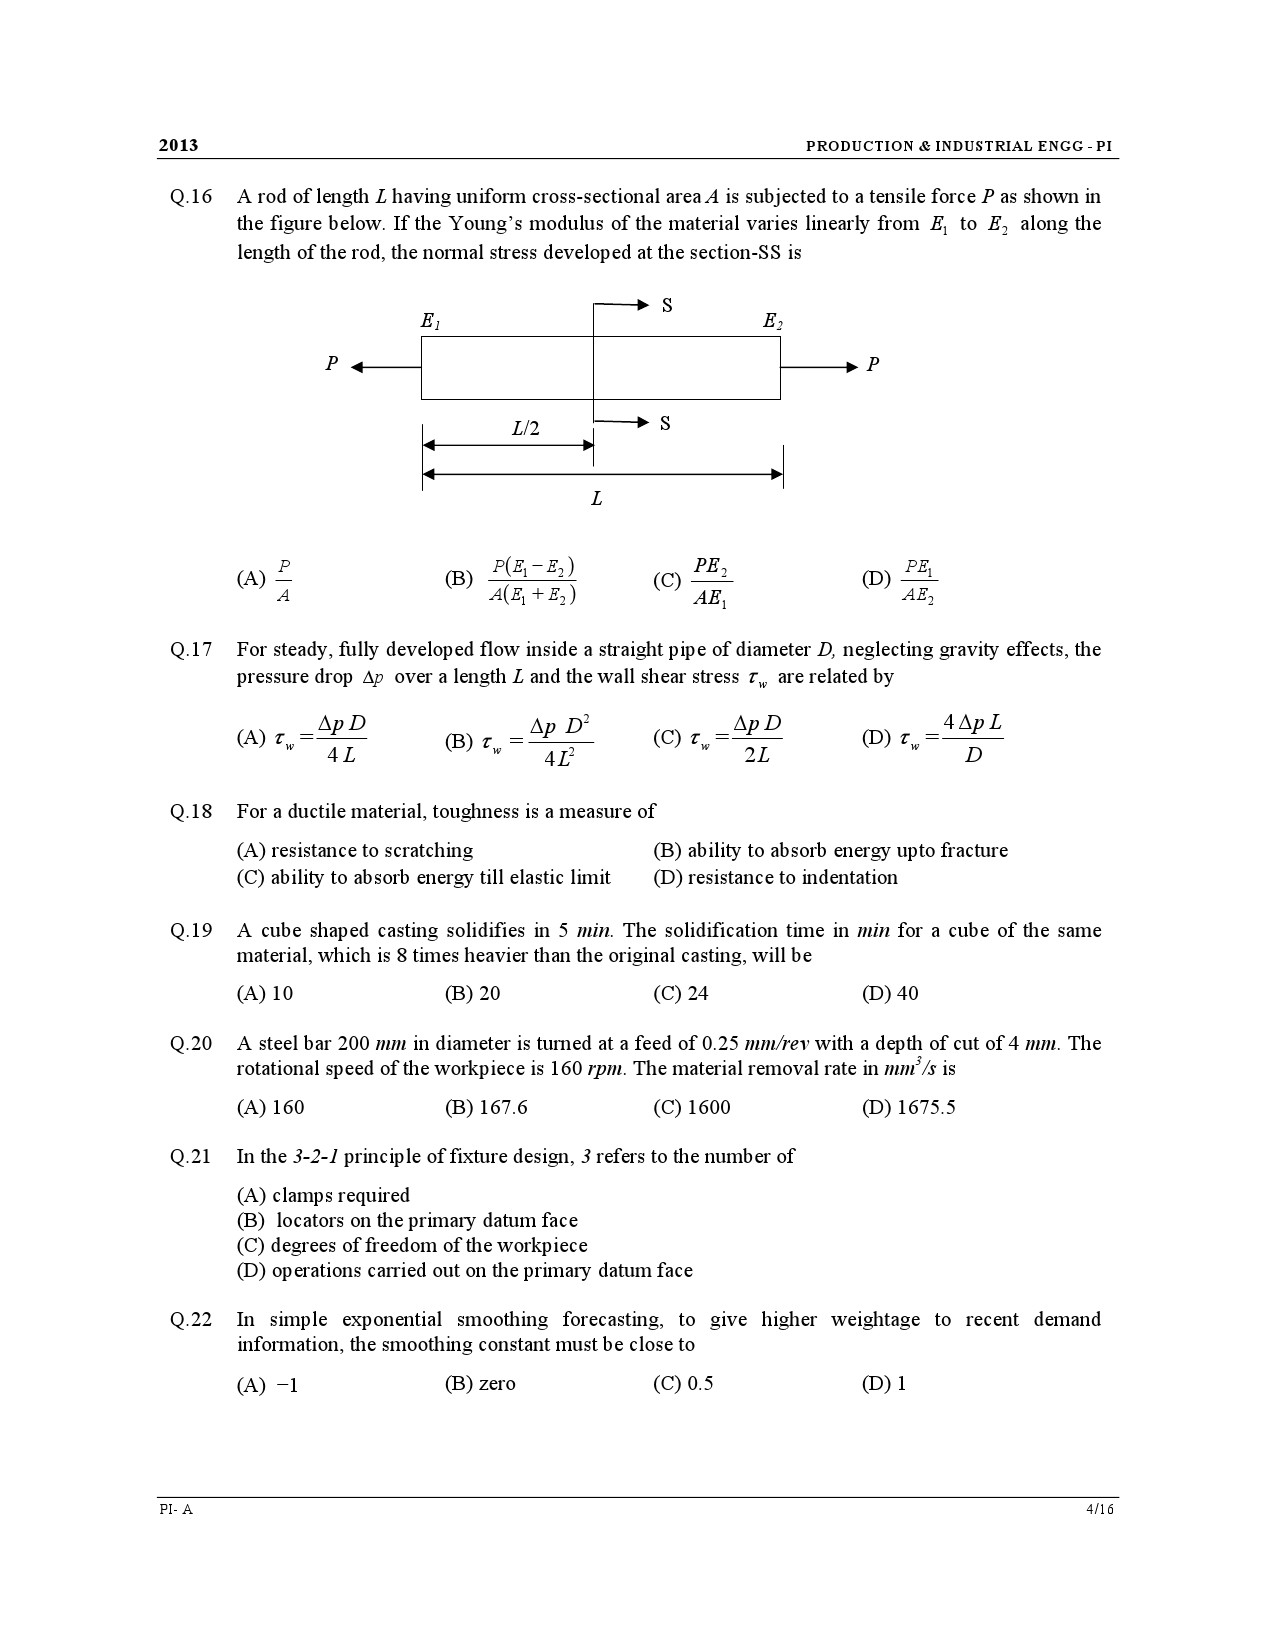 GATE Exam Question Paper 2013 Production and Industrial Engineering 4